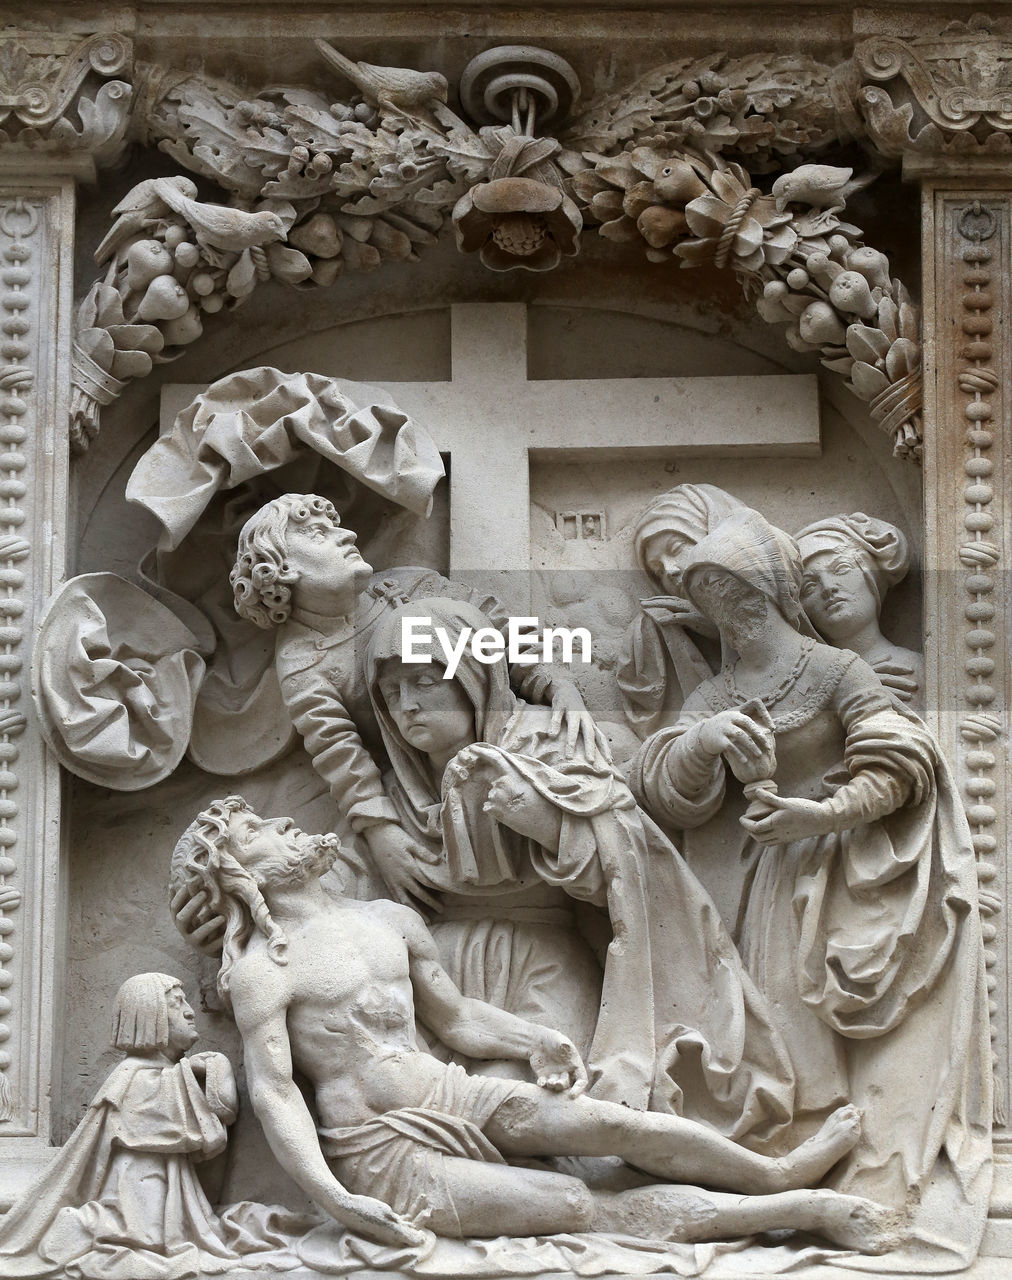 Lamentation of christ sculpture at st stephens cathedral